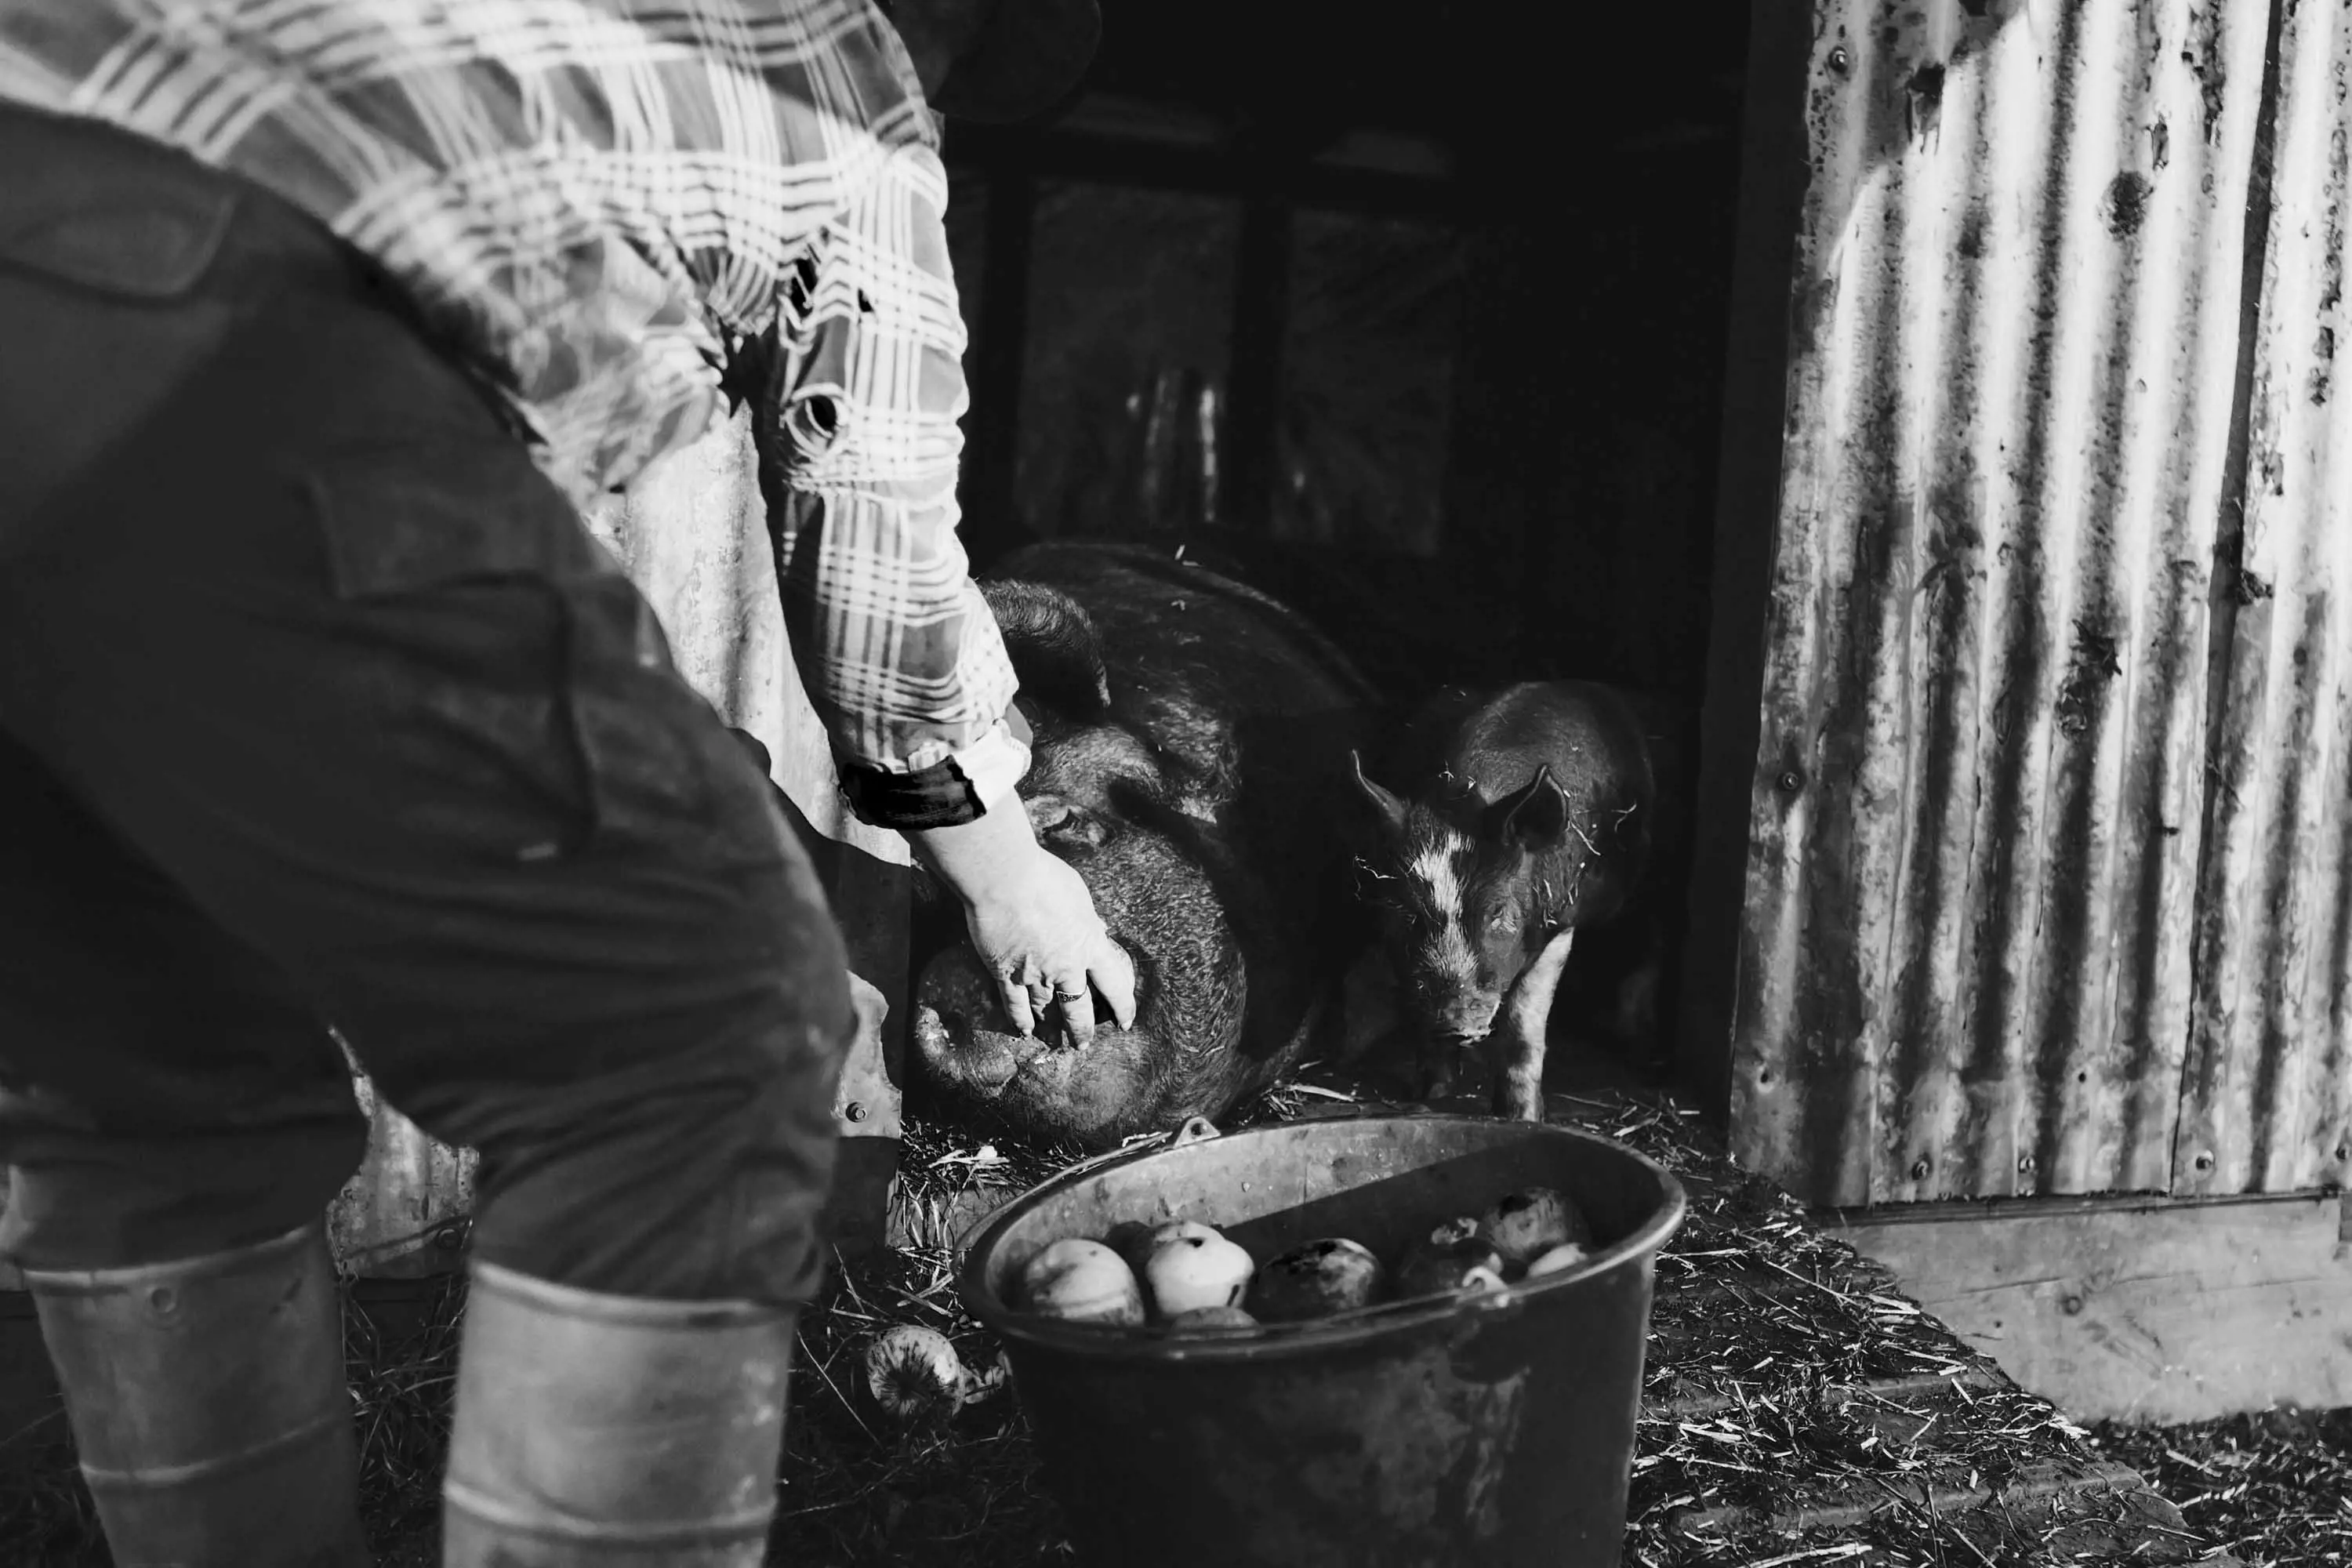 A famer feeds small pigs with apples from a black plastic bucket.